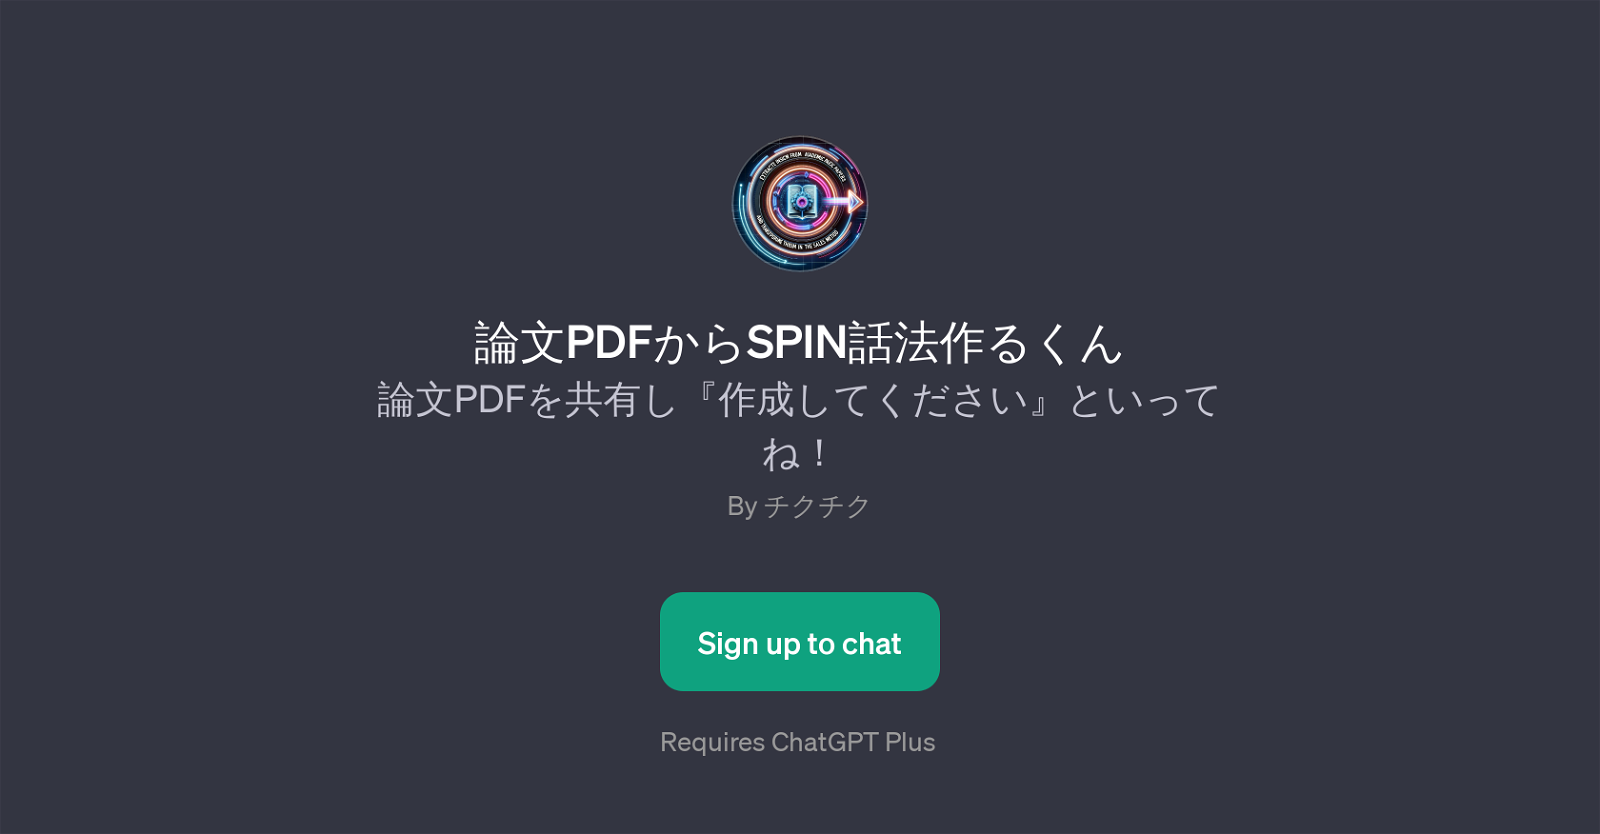 PDFSPIN website